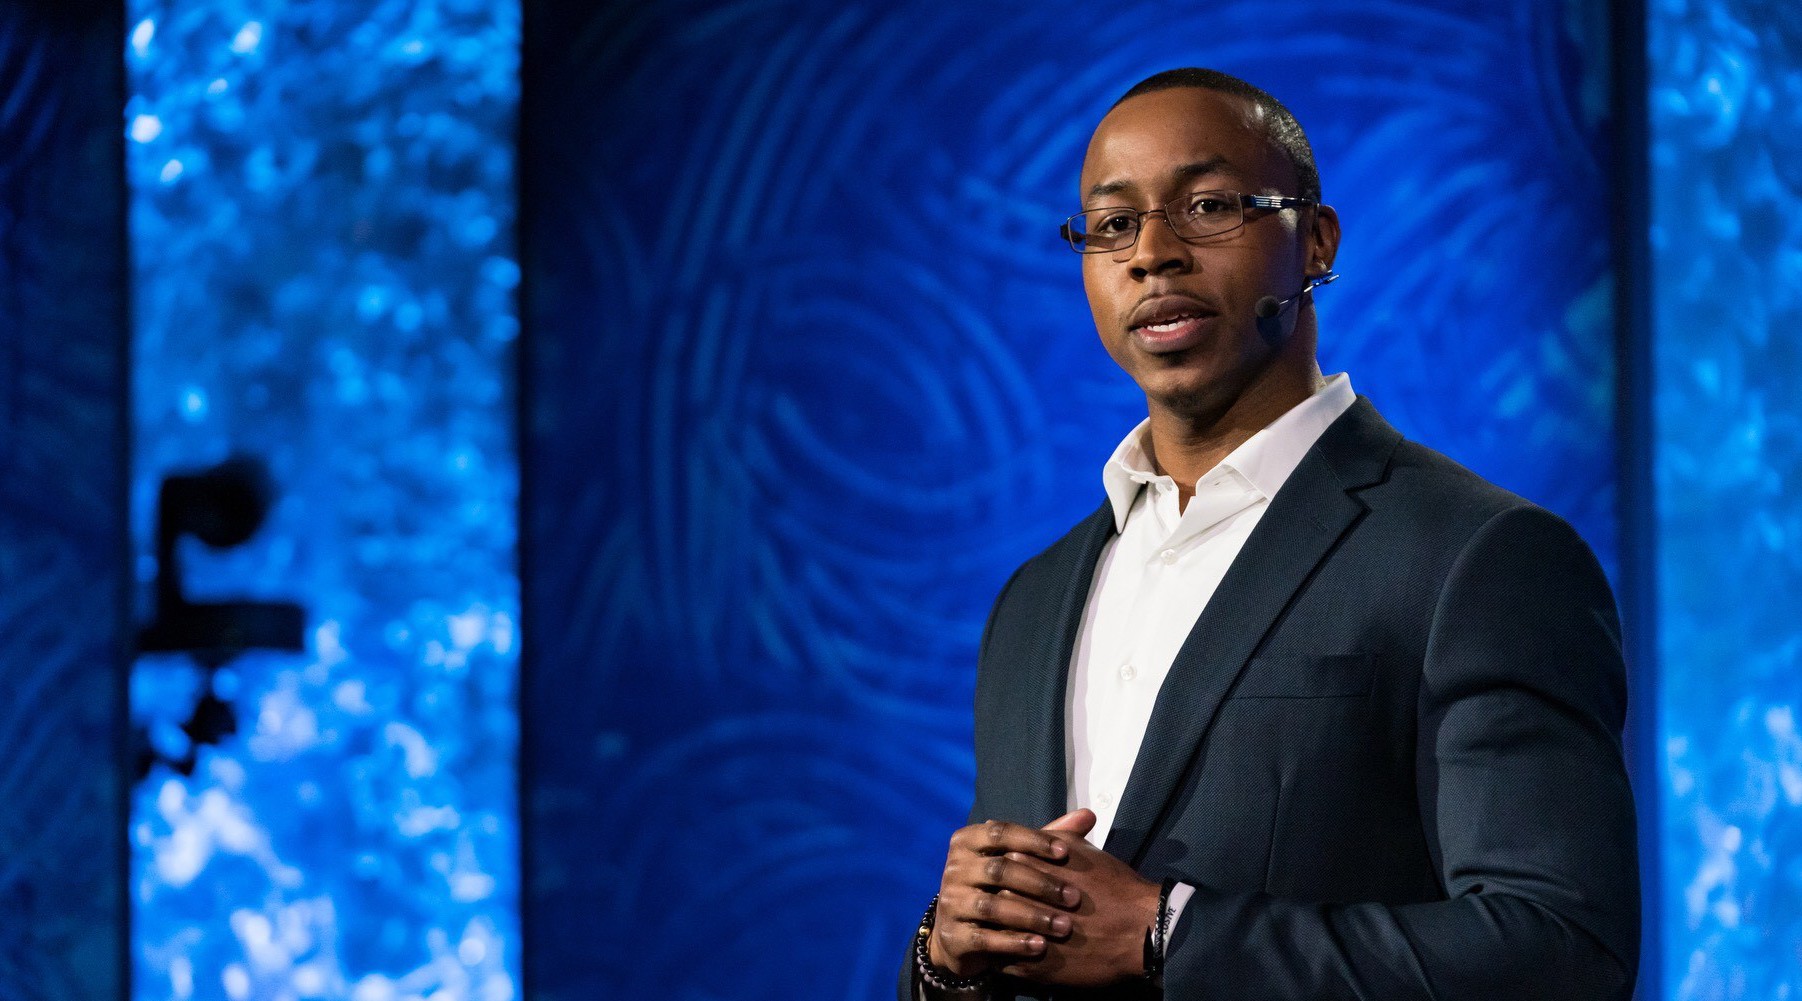 Jarrell Daniels, incoming Fall 2019 GS student, gives a Ted Talk about criminal justice and incarceration